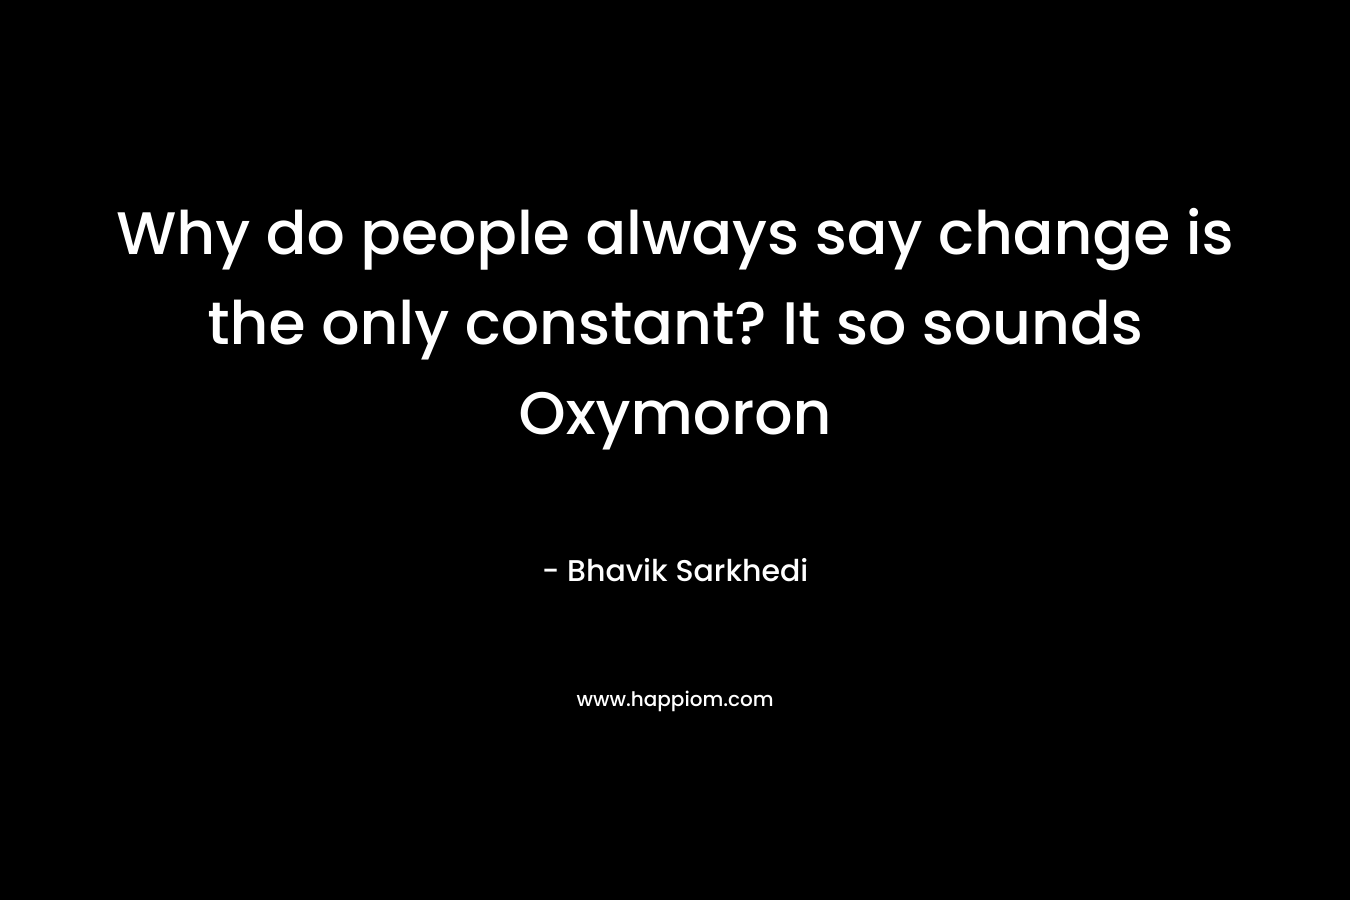 Why do people always say change is the only constant? It so sounds Oxymoron